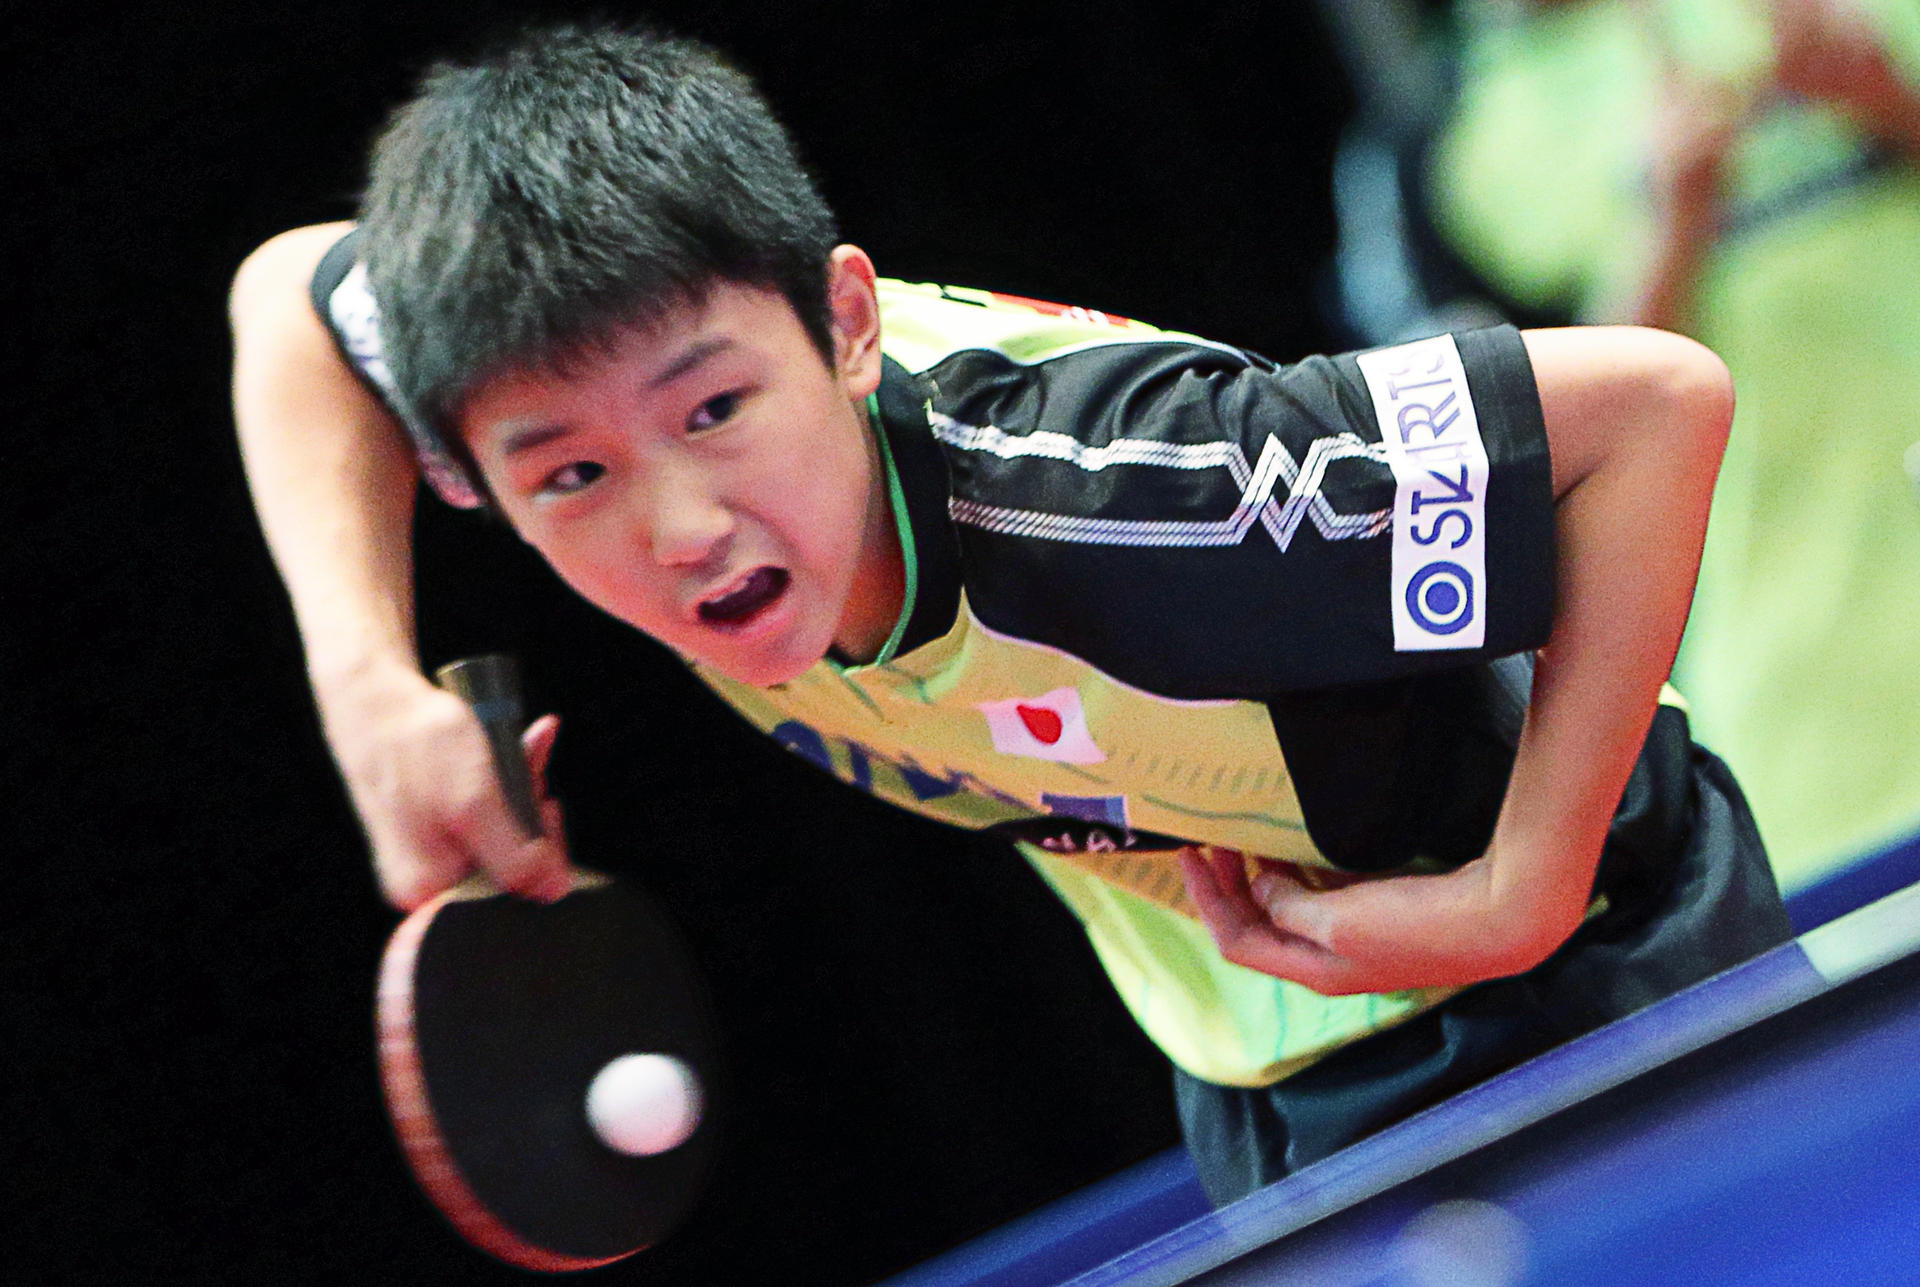 Japan's Tomokazu Harimoto competes at the Nikon Hong Kong Junior &amp; Cadet Open at Queen Elizabeth Stadium where he notched two wins yesterday. Photo: K.Y. Cheng